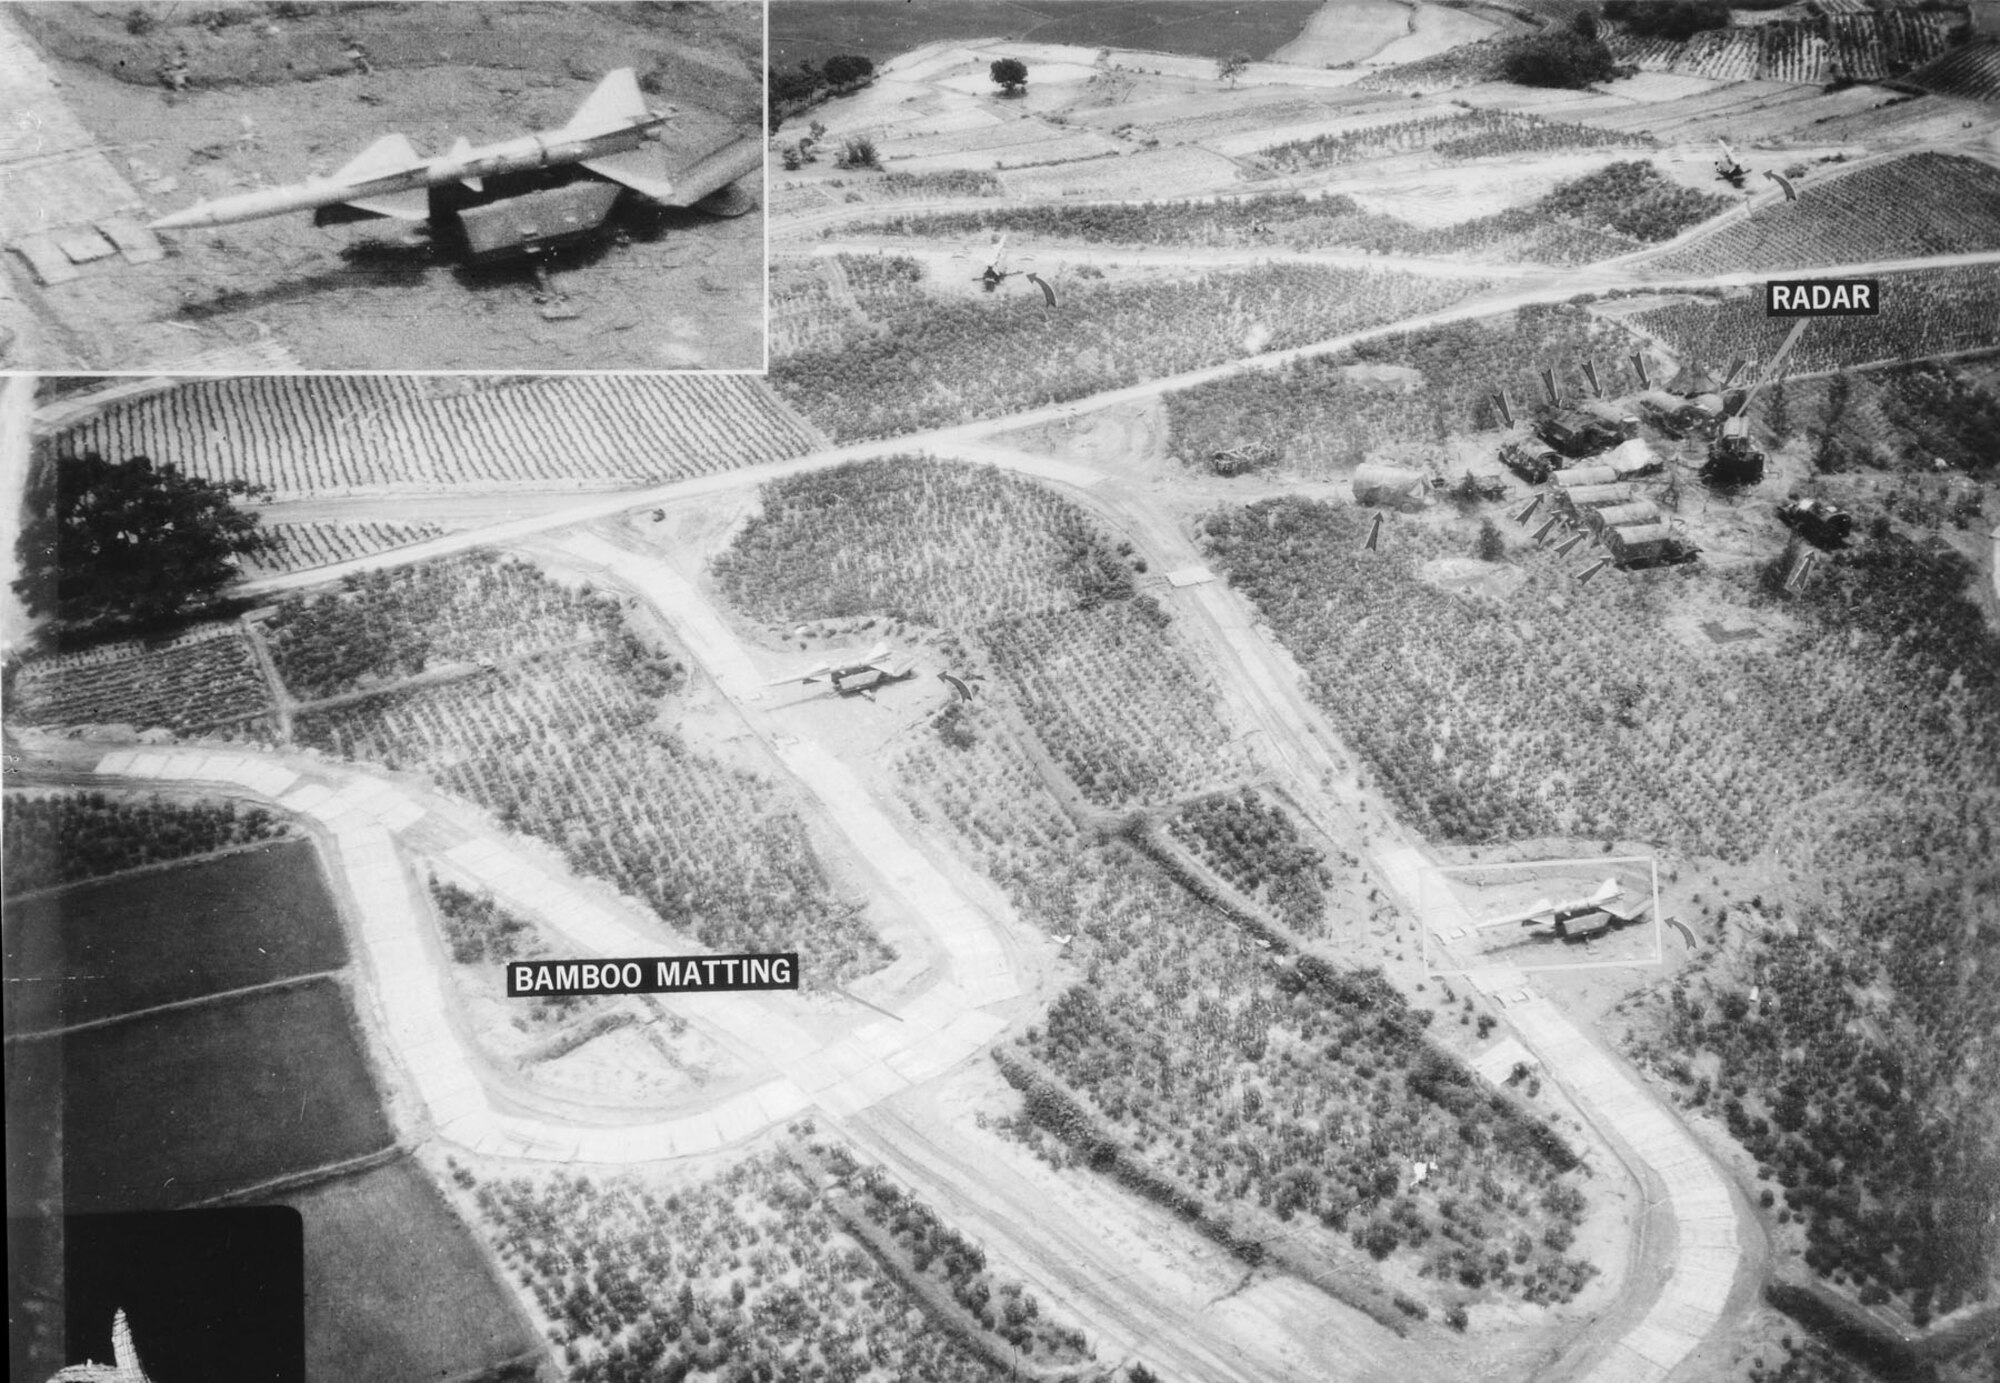 Photograph of SA-2 site in North Vietnam taken by a US reconnaissance aircraft in August 1965. (U.S. Air Force photo)